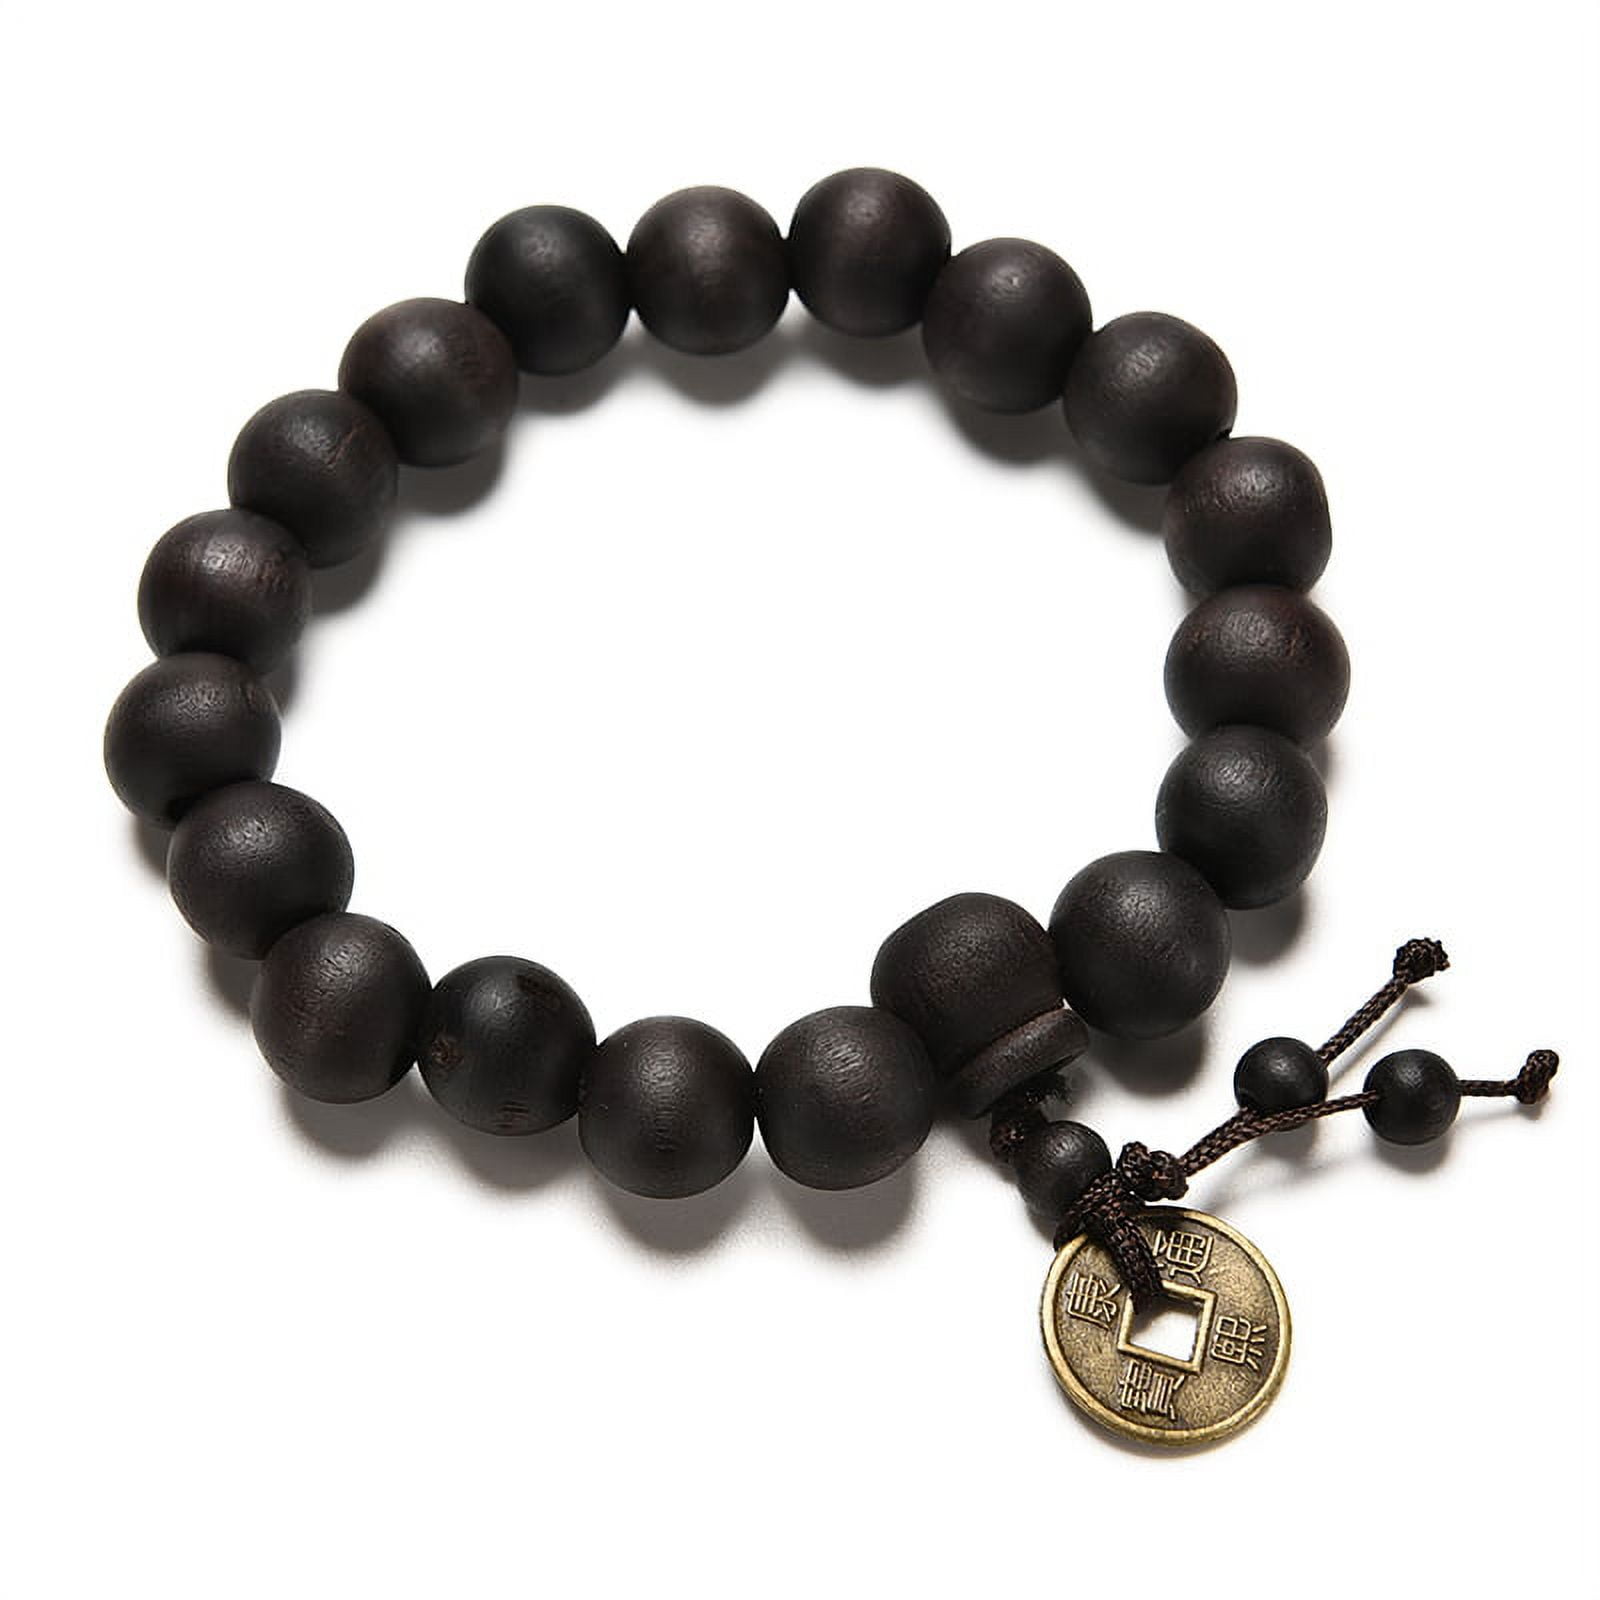 Buy Authetic Buddhist Prayer Beads blessed by Real Monks